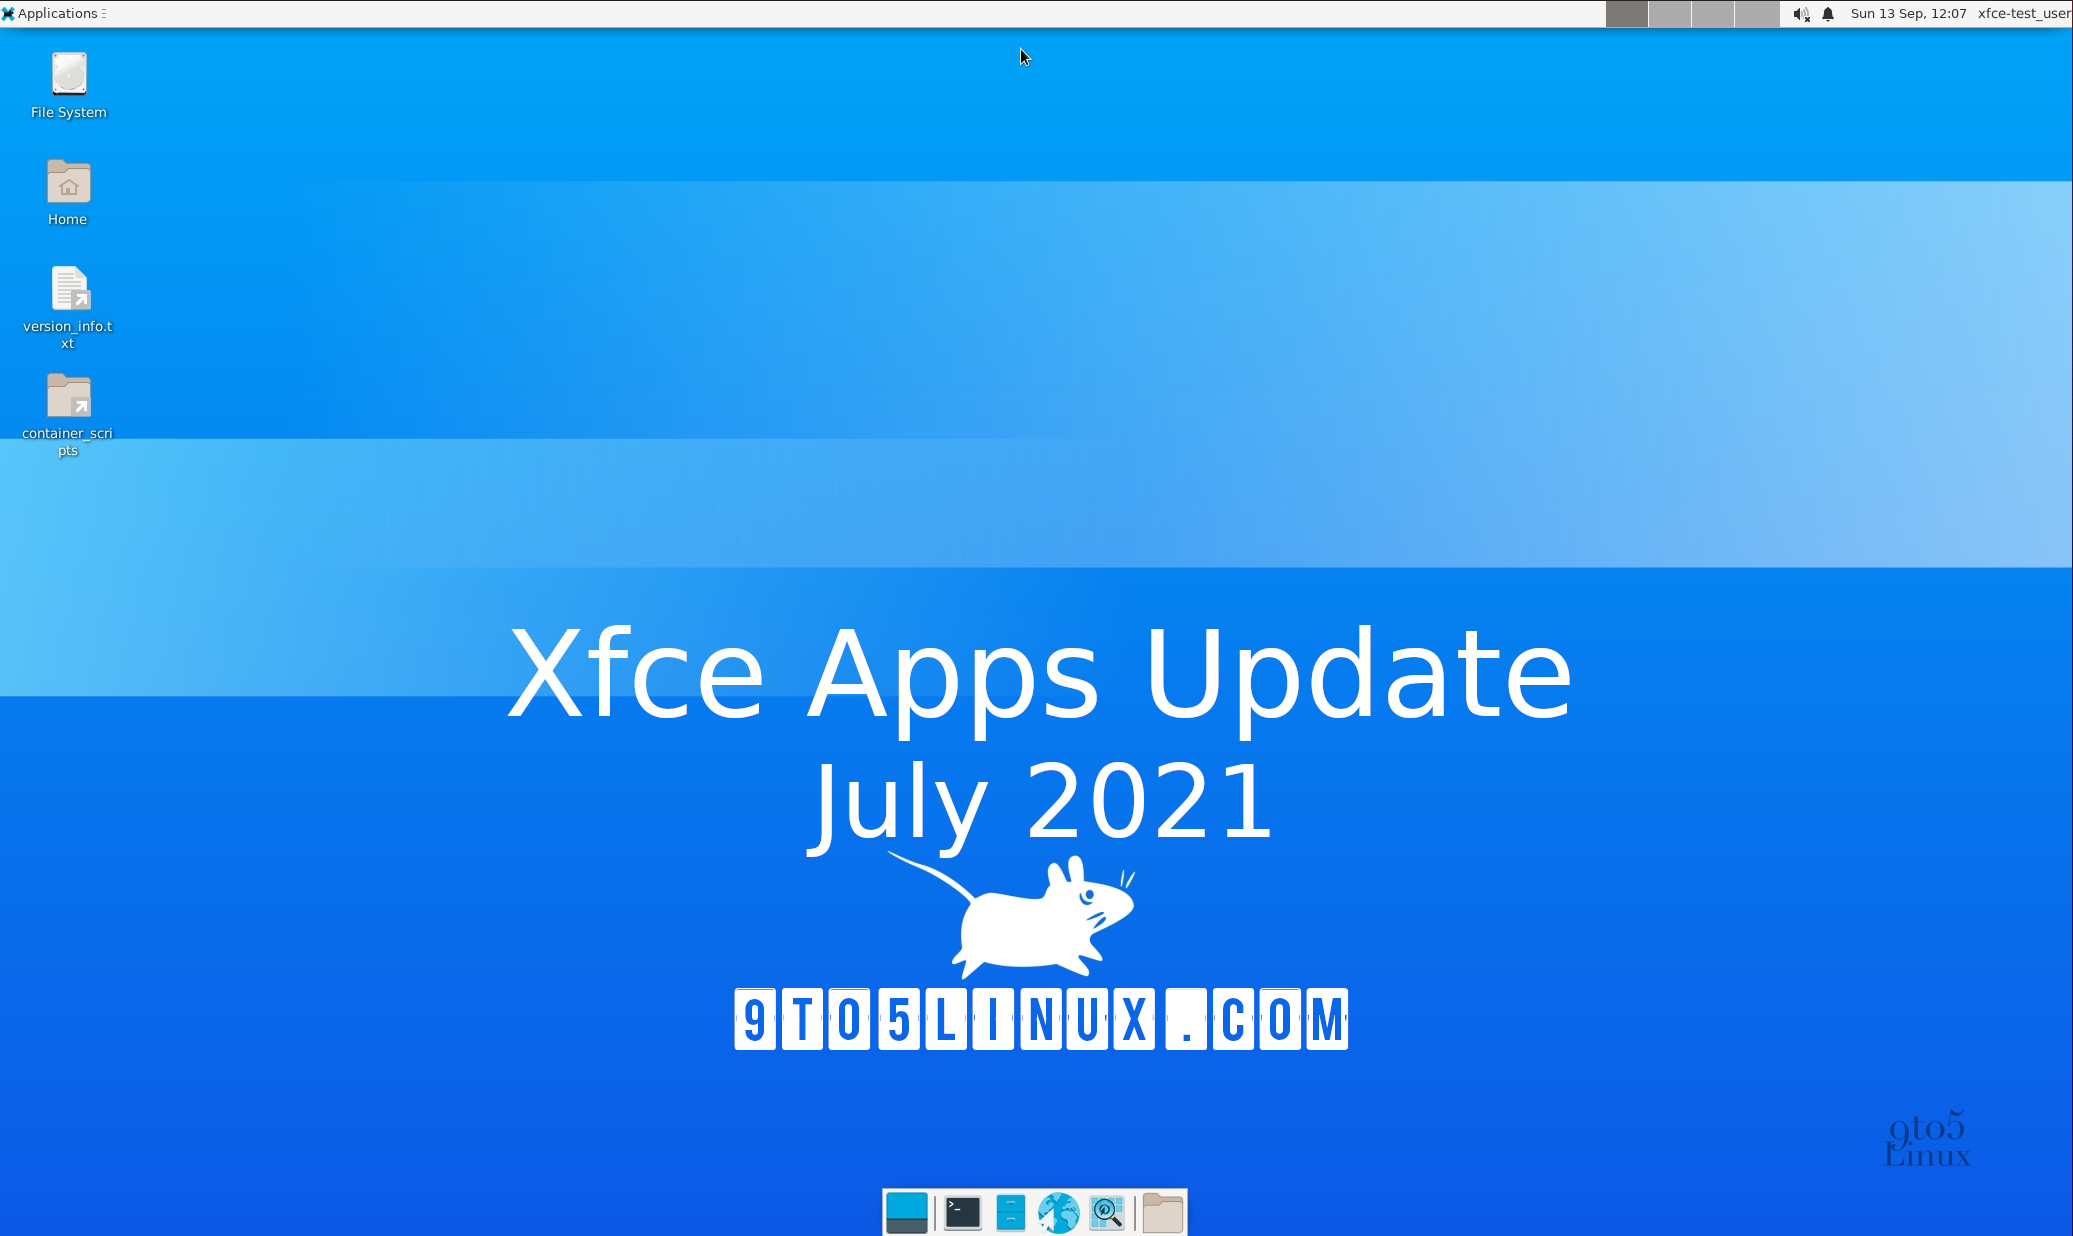 Xfce’s Apps Update for July 2021 Brings New Releases of Catfish, Mousepad, Sensors Plugin, and More